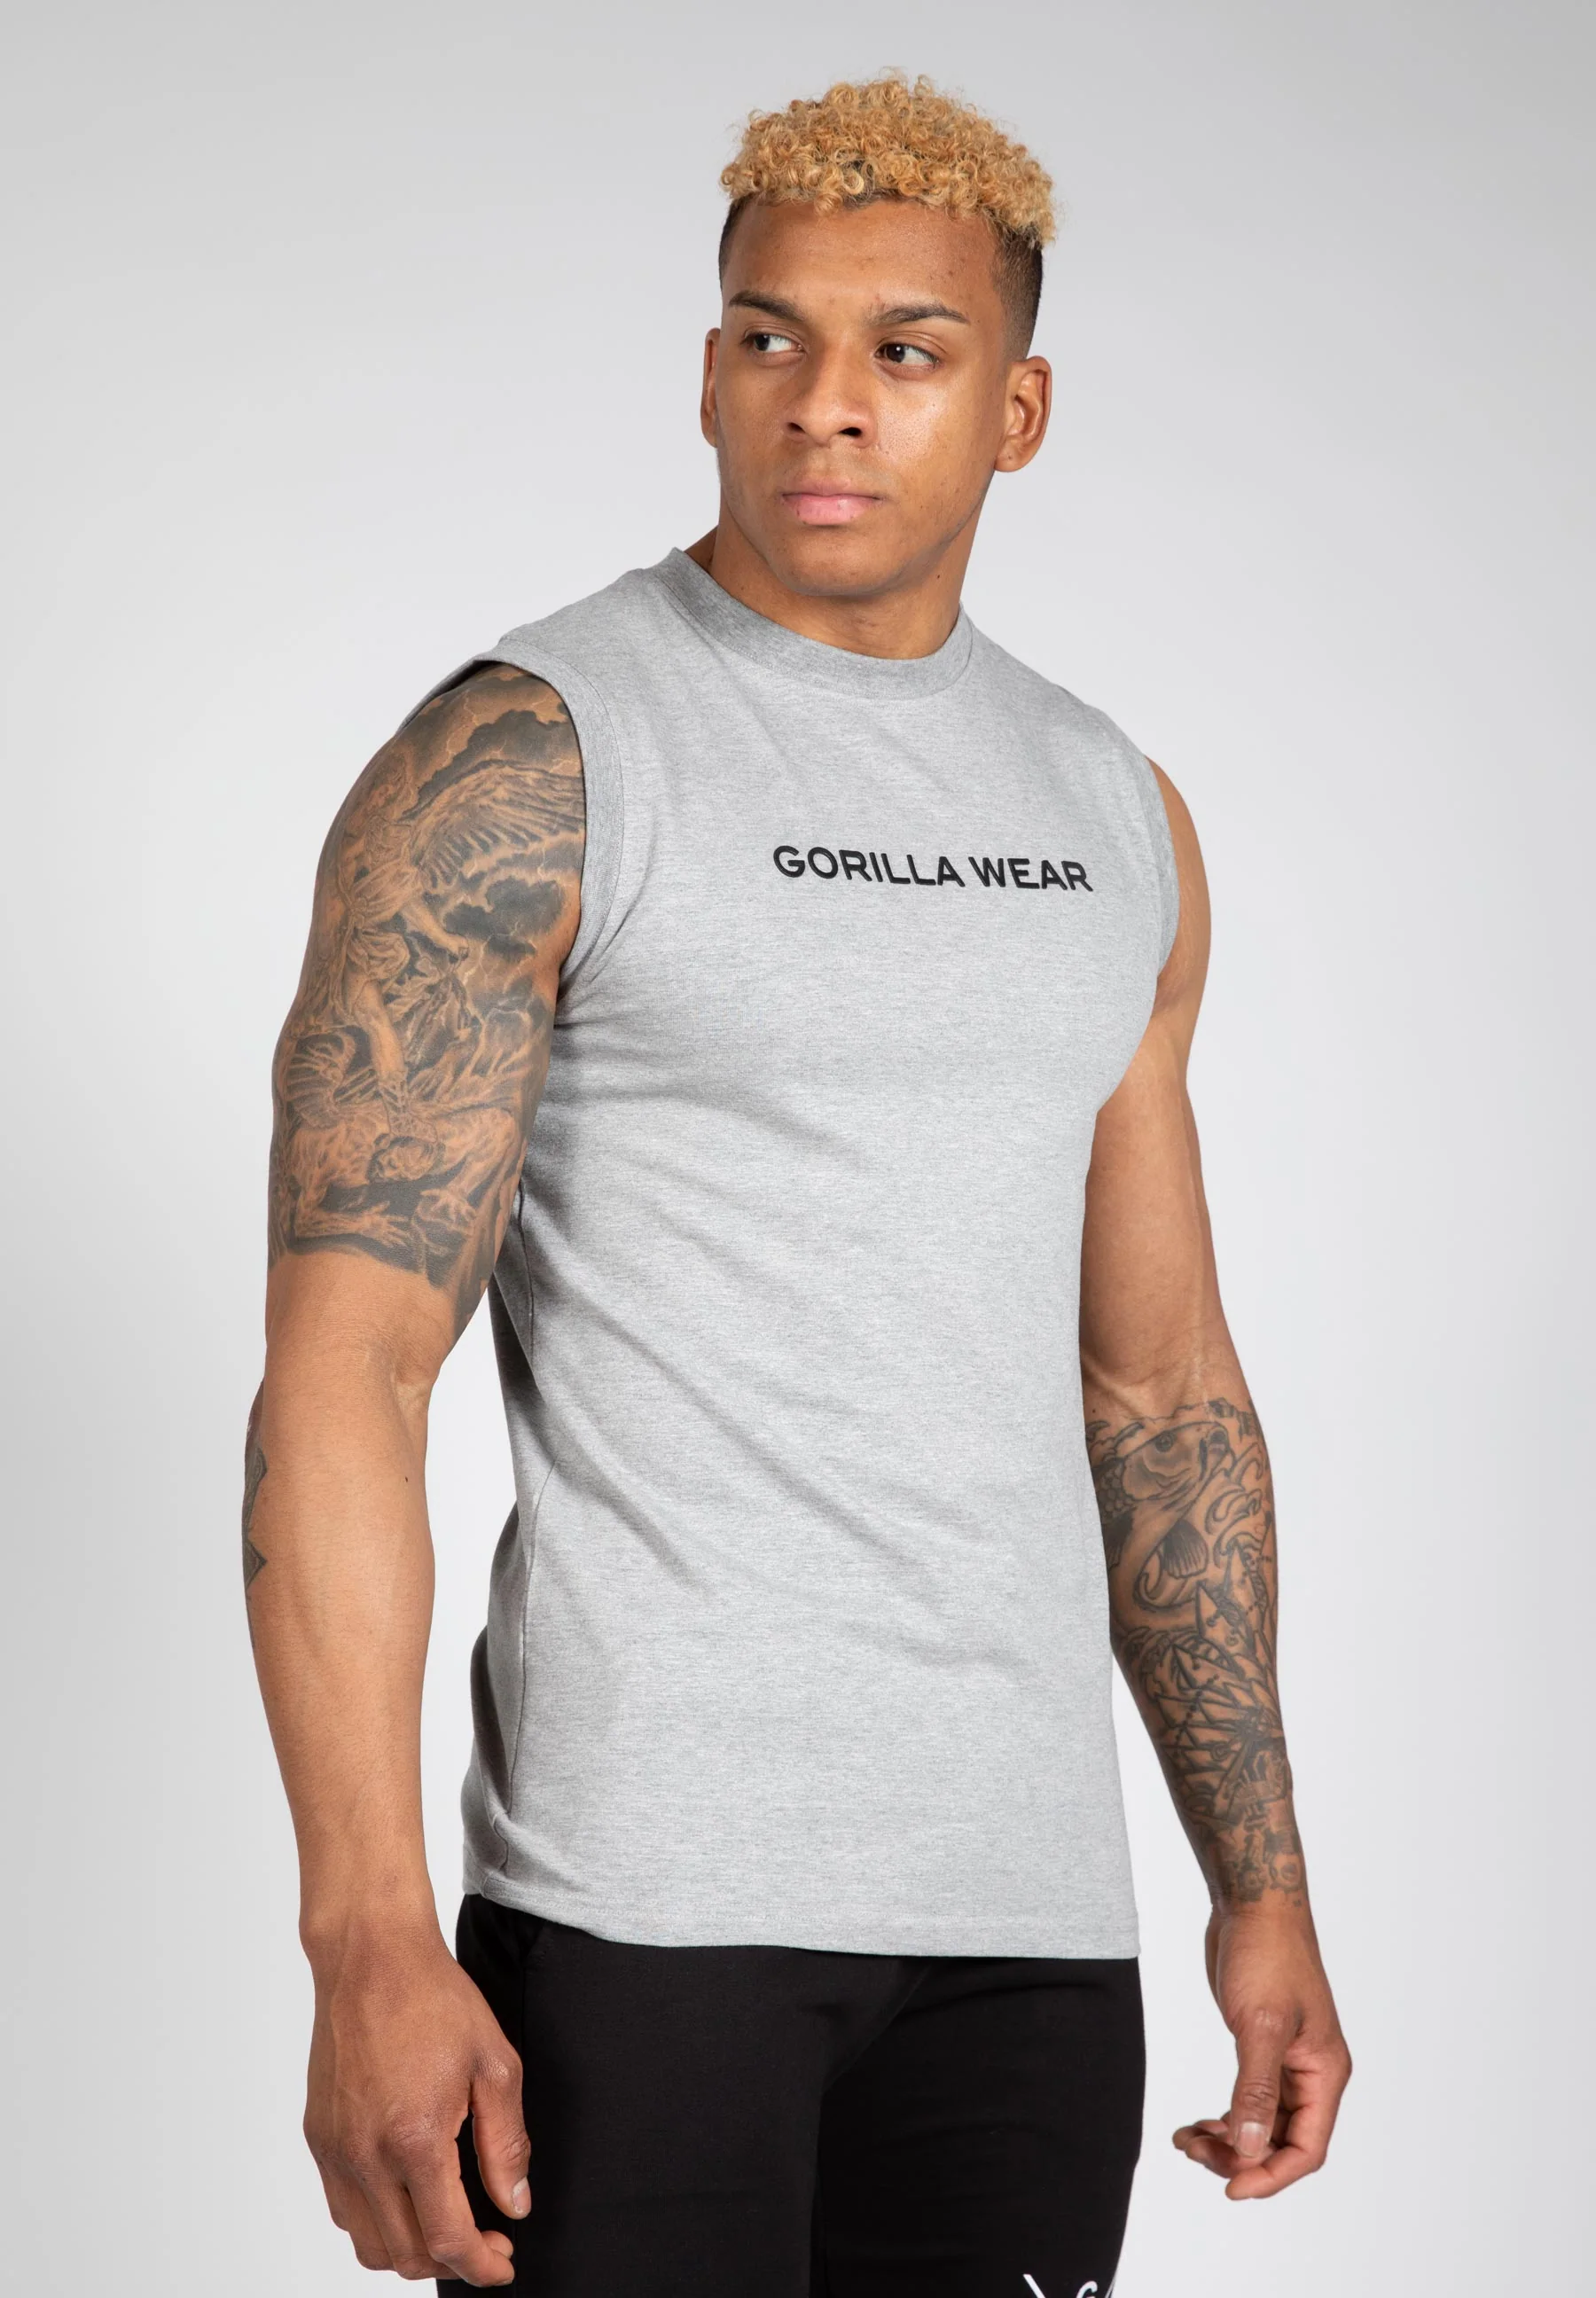 Gorilla Wear: Unleash Your Inner Beast with Unique Gym Clothing